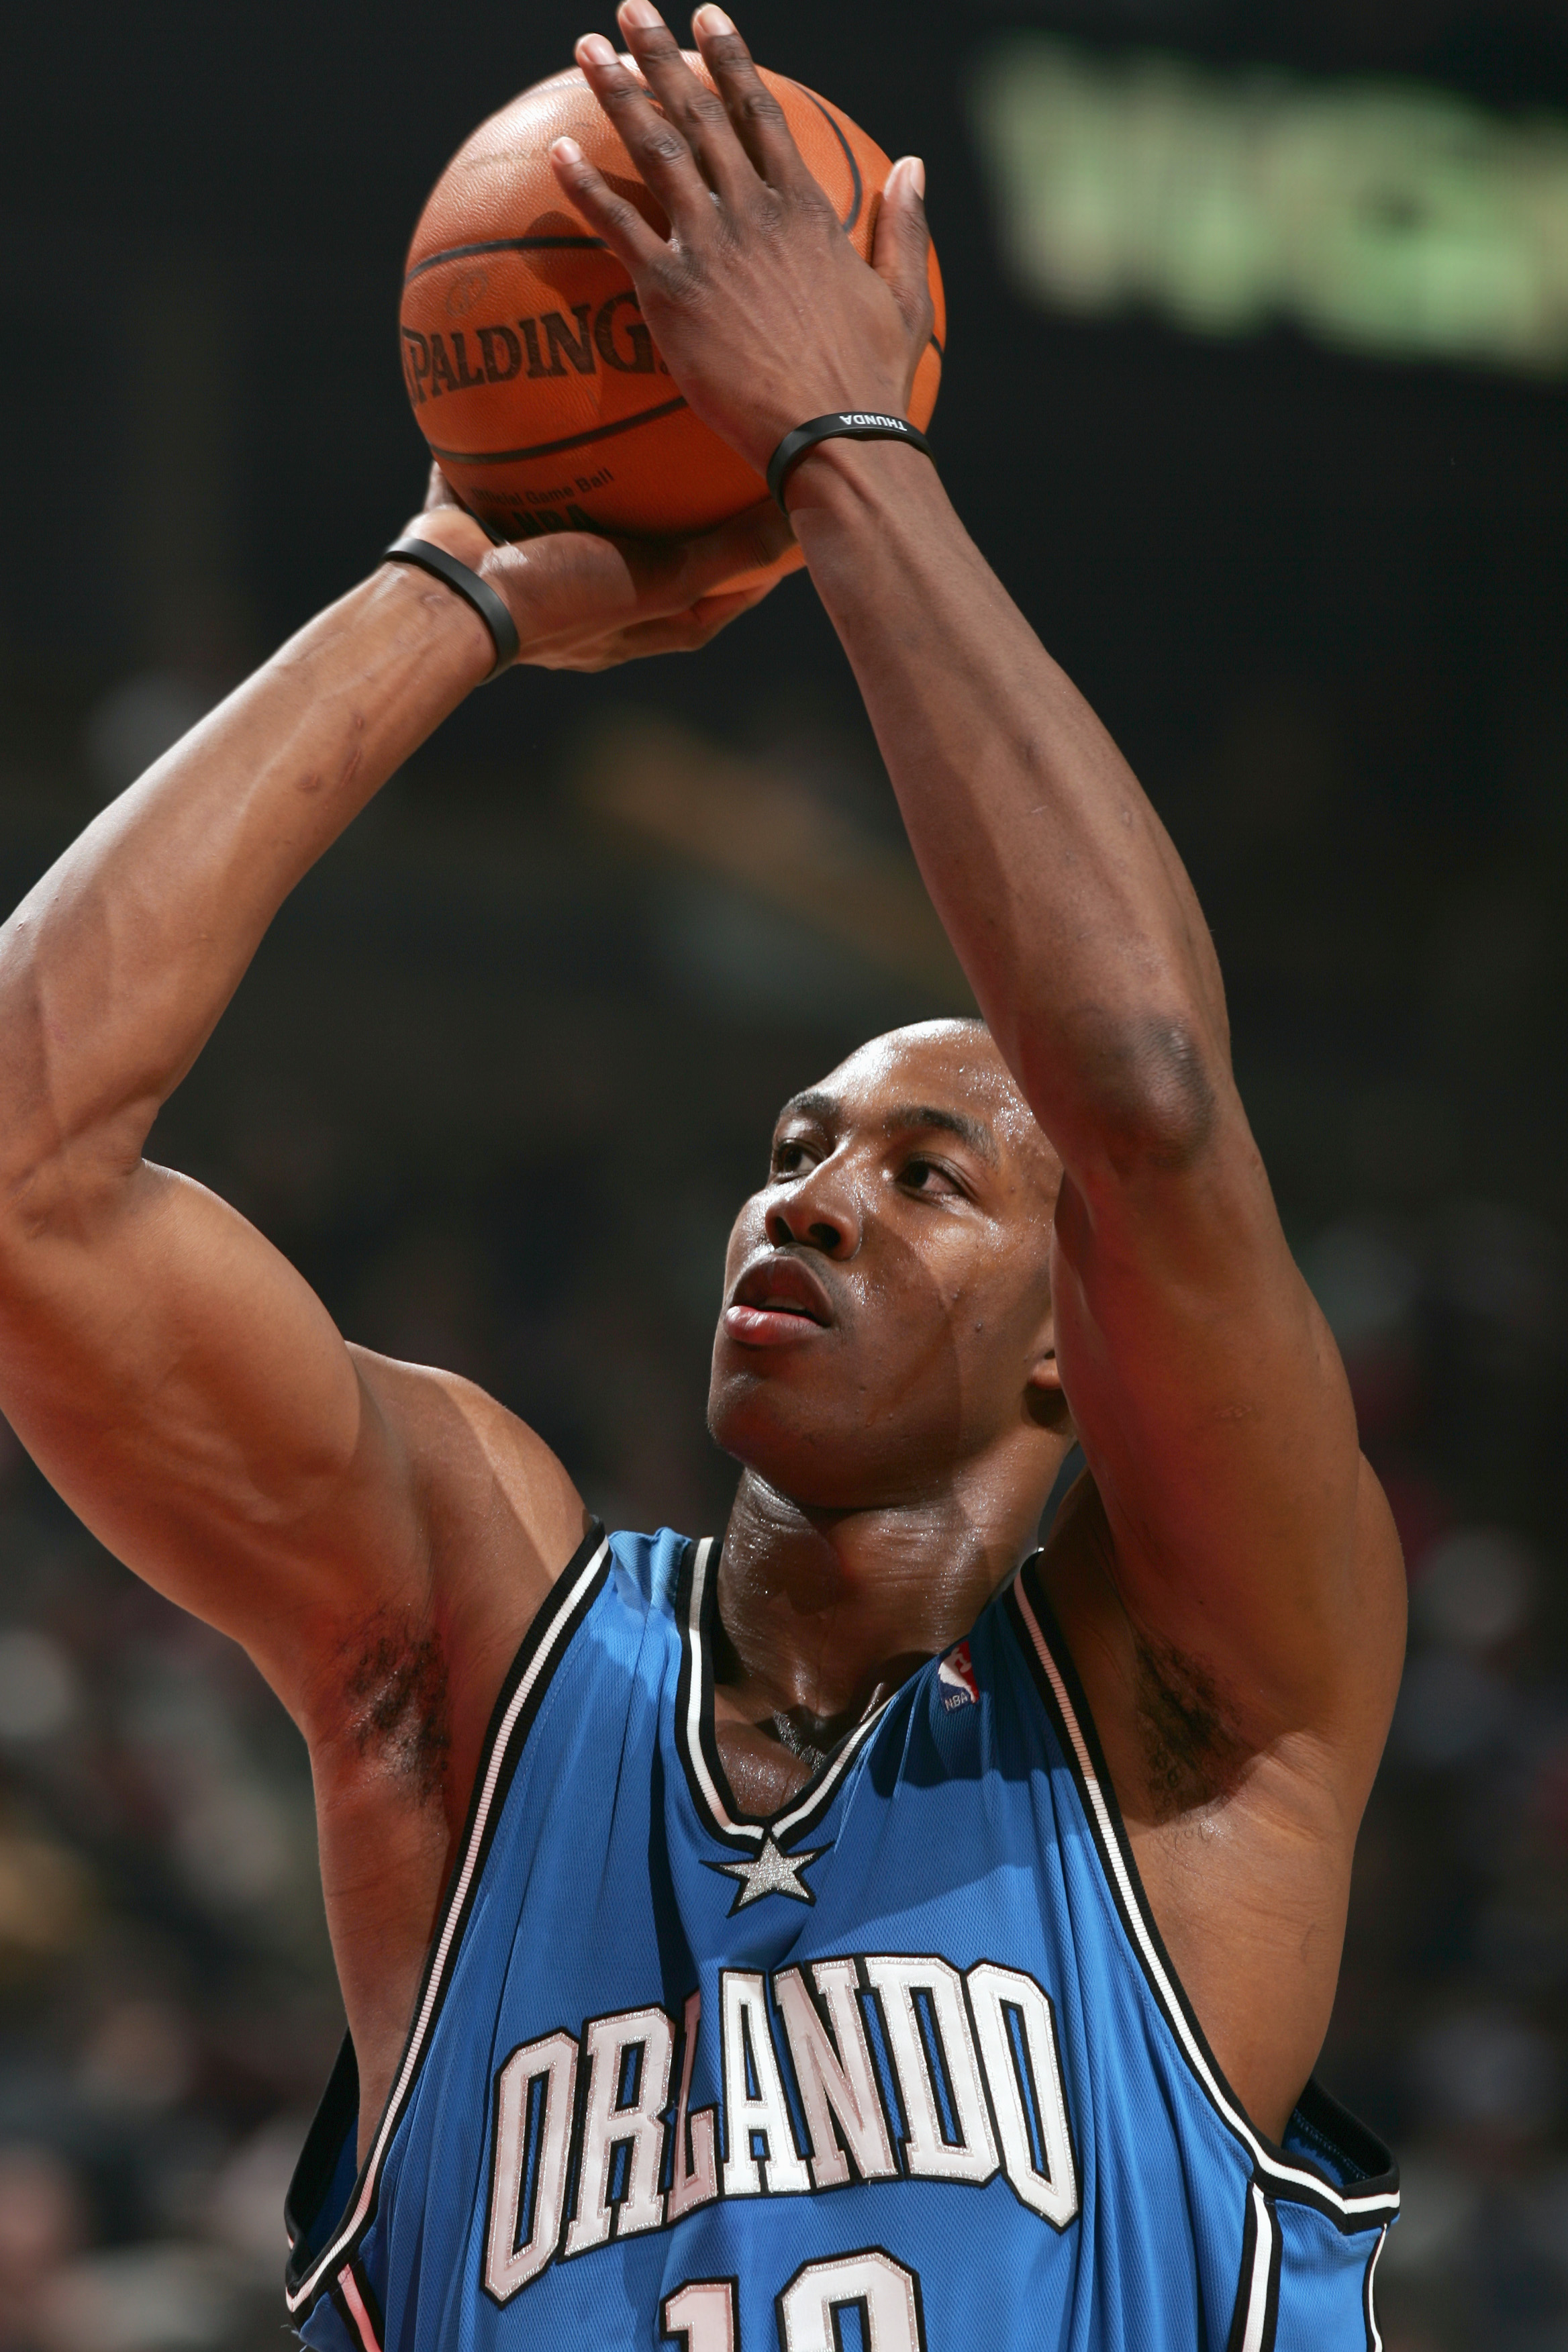 CHICAGO - MARCH 28: Dwight Howard #12 of the Orlando Magic takes a shot during the game against the Chicago Bulls on March 28, 2006 at the United Center in Chicago, Illinois. The Magic defeated the Bulls 97-93.  NOTE TO USER: User expressly acknowledges a